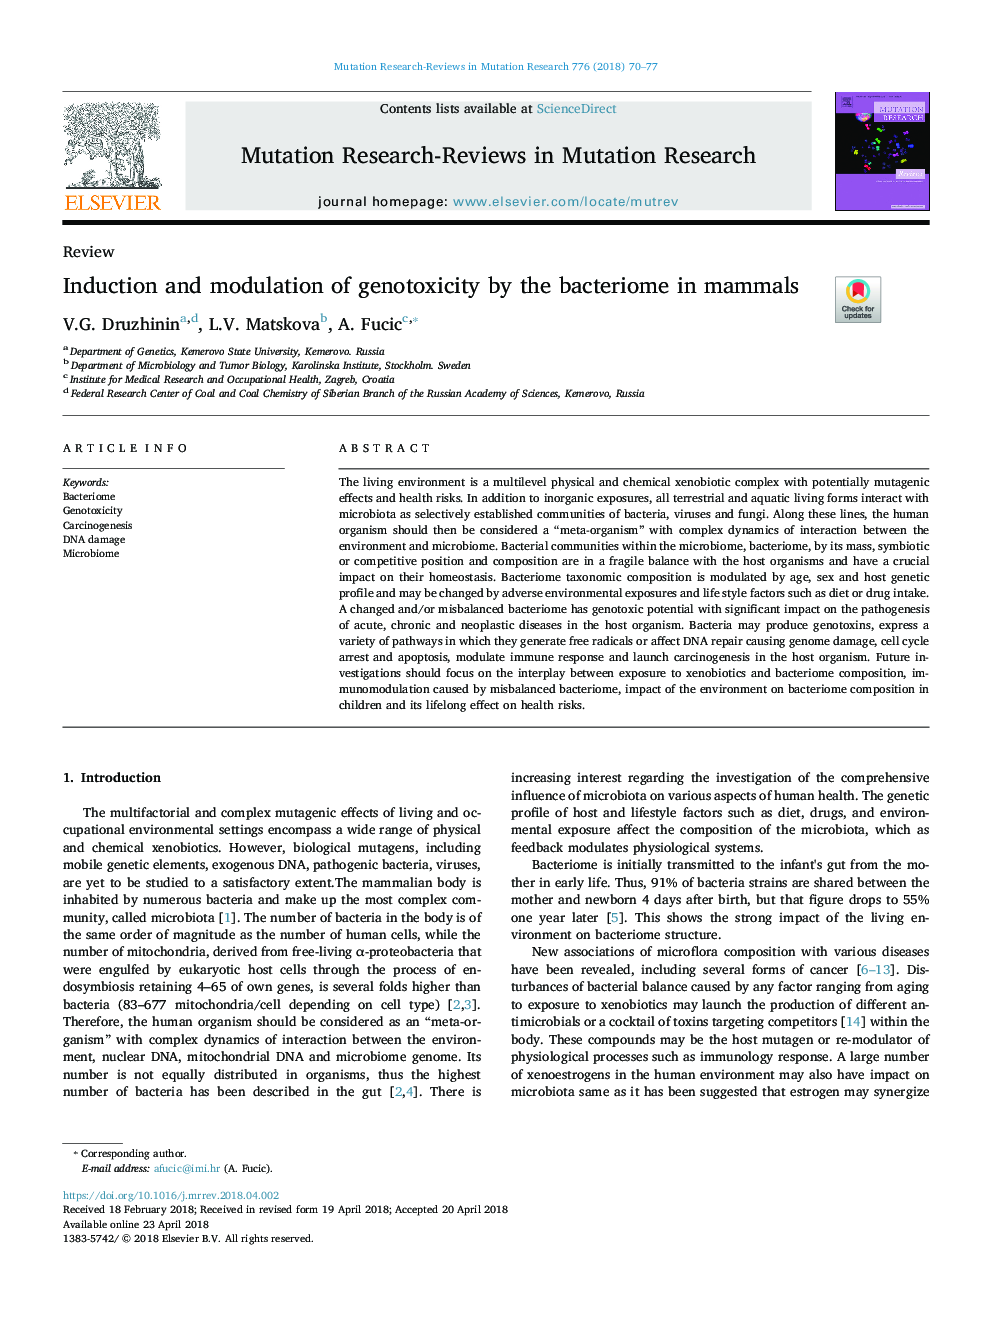 Induction and modulation of genotoxicity by the bacteriome in mammals